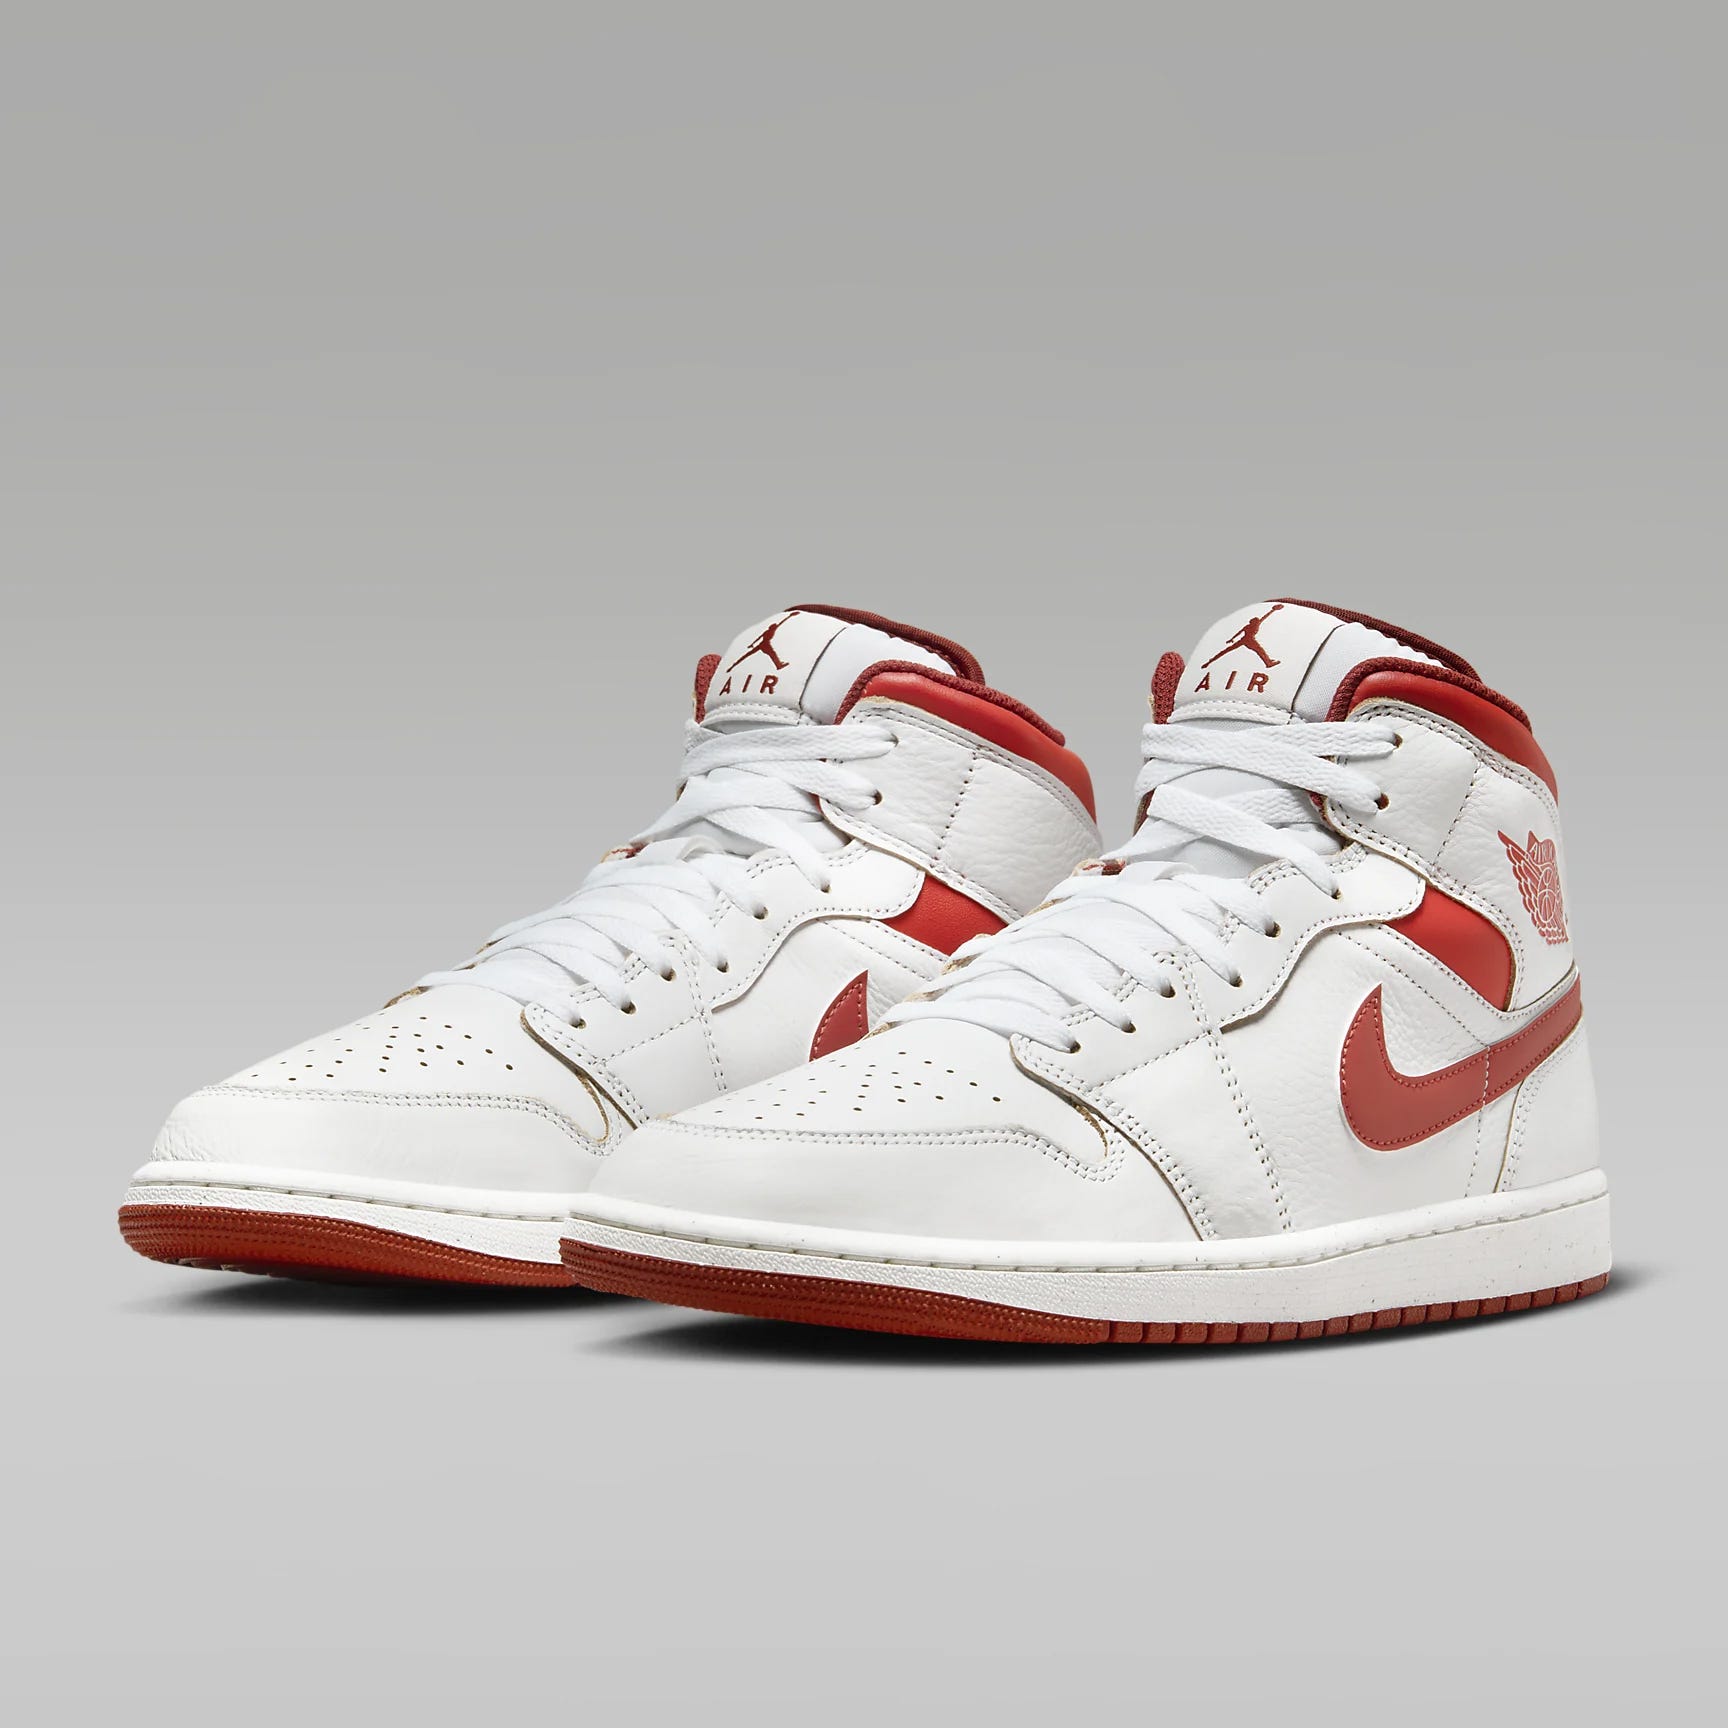 A pair of white and red high-top sneakers with prominent swoosh logos on the sides.